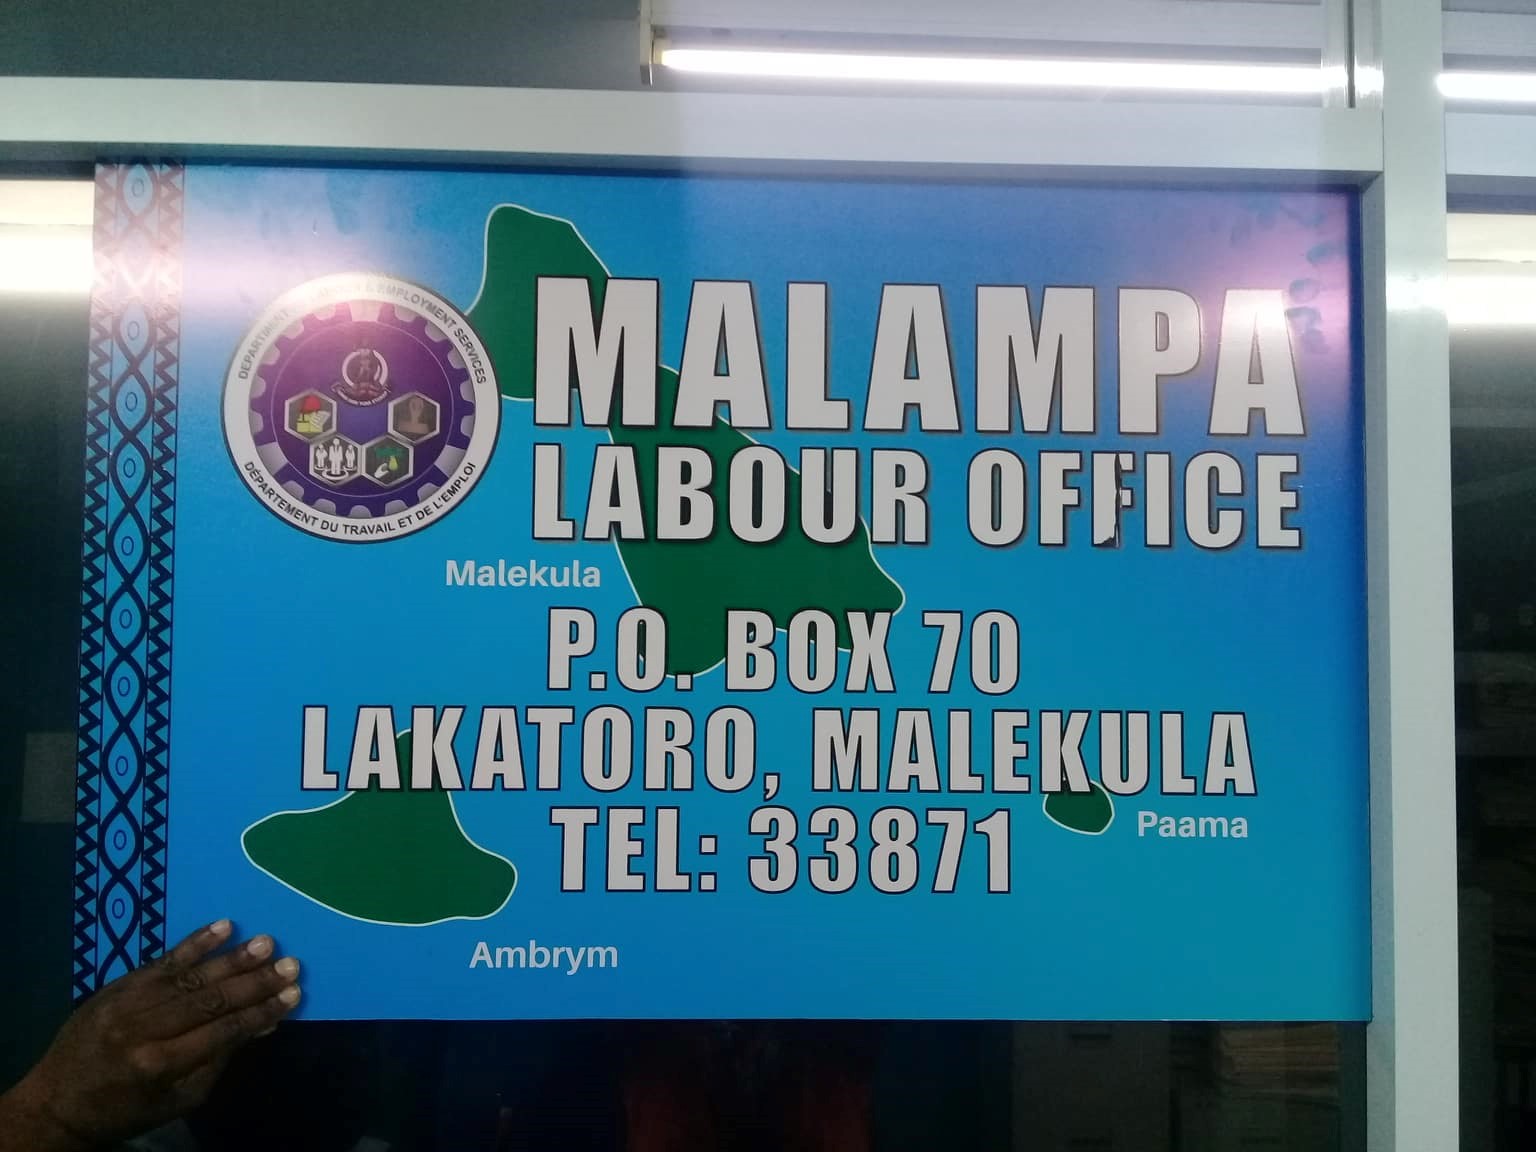 New Labour Office At Malampa Province